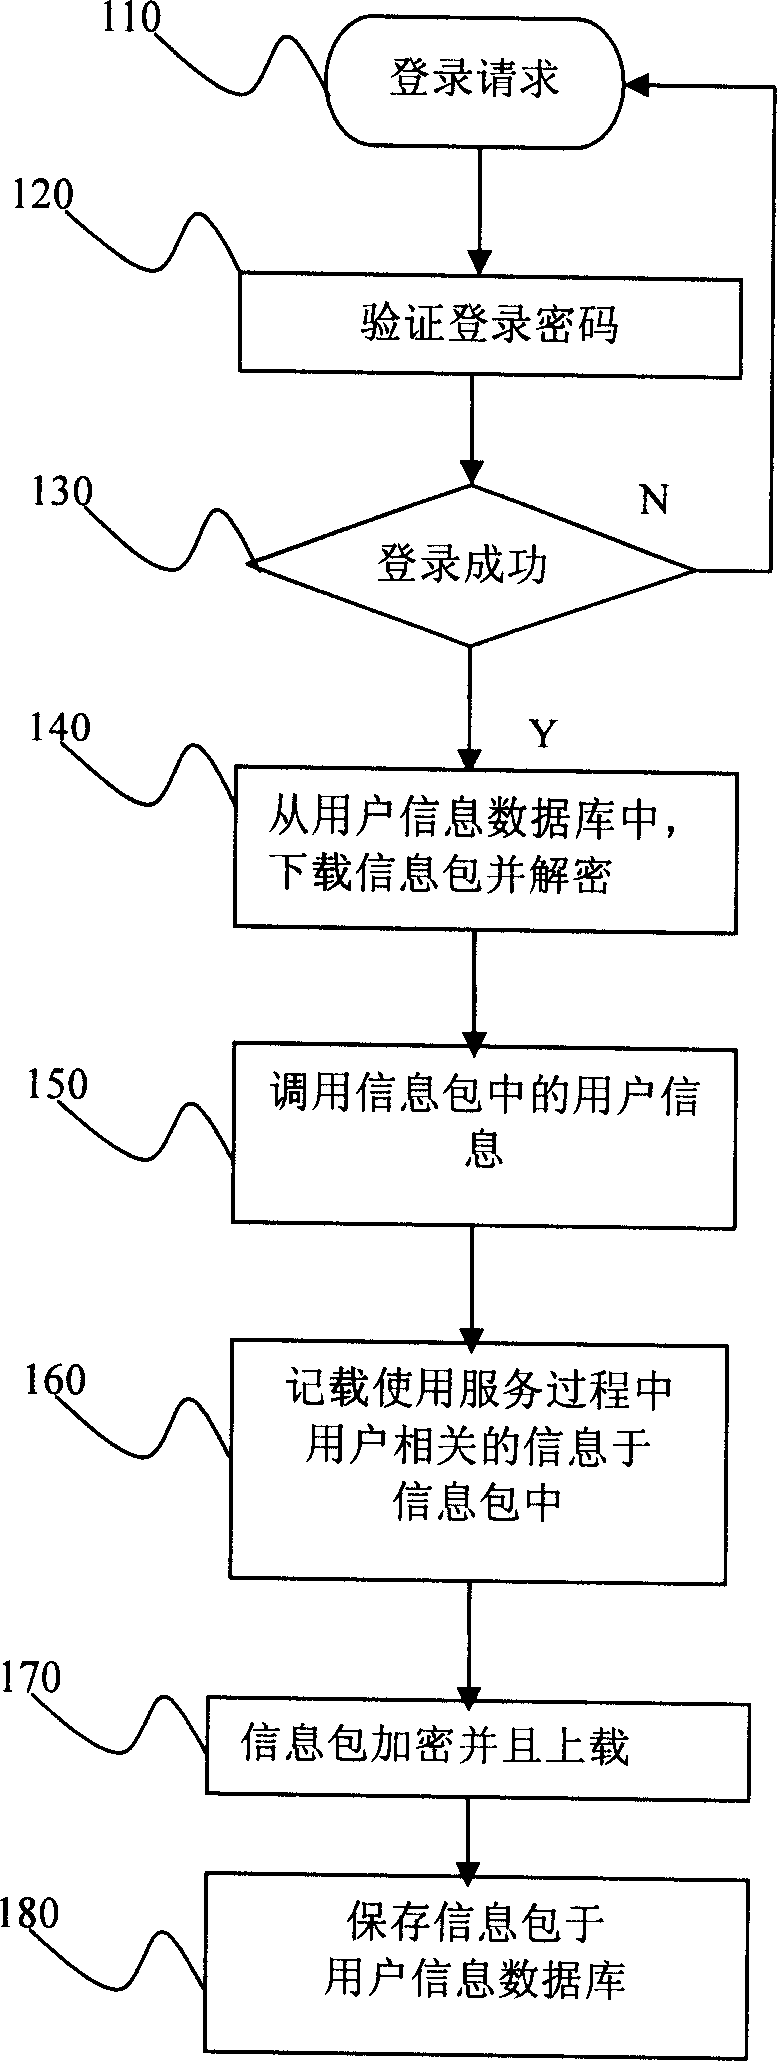 Method and system for processing user information